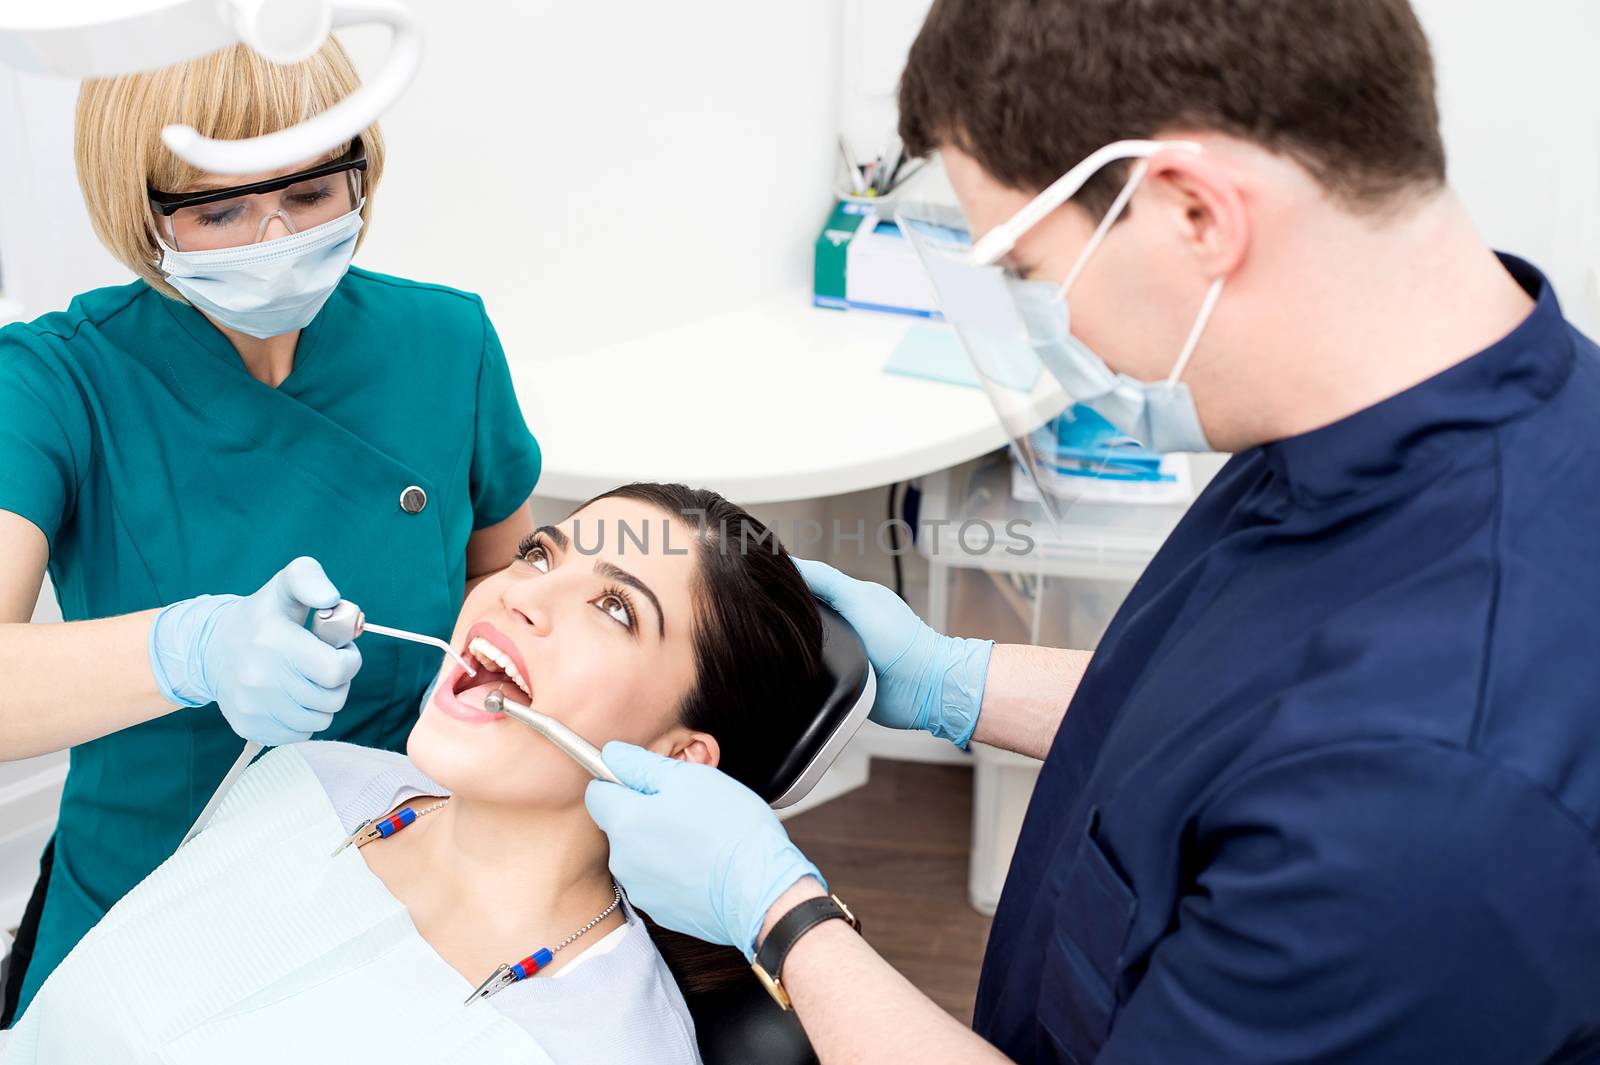 Male dentist treating patient teeth with assistant